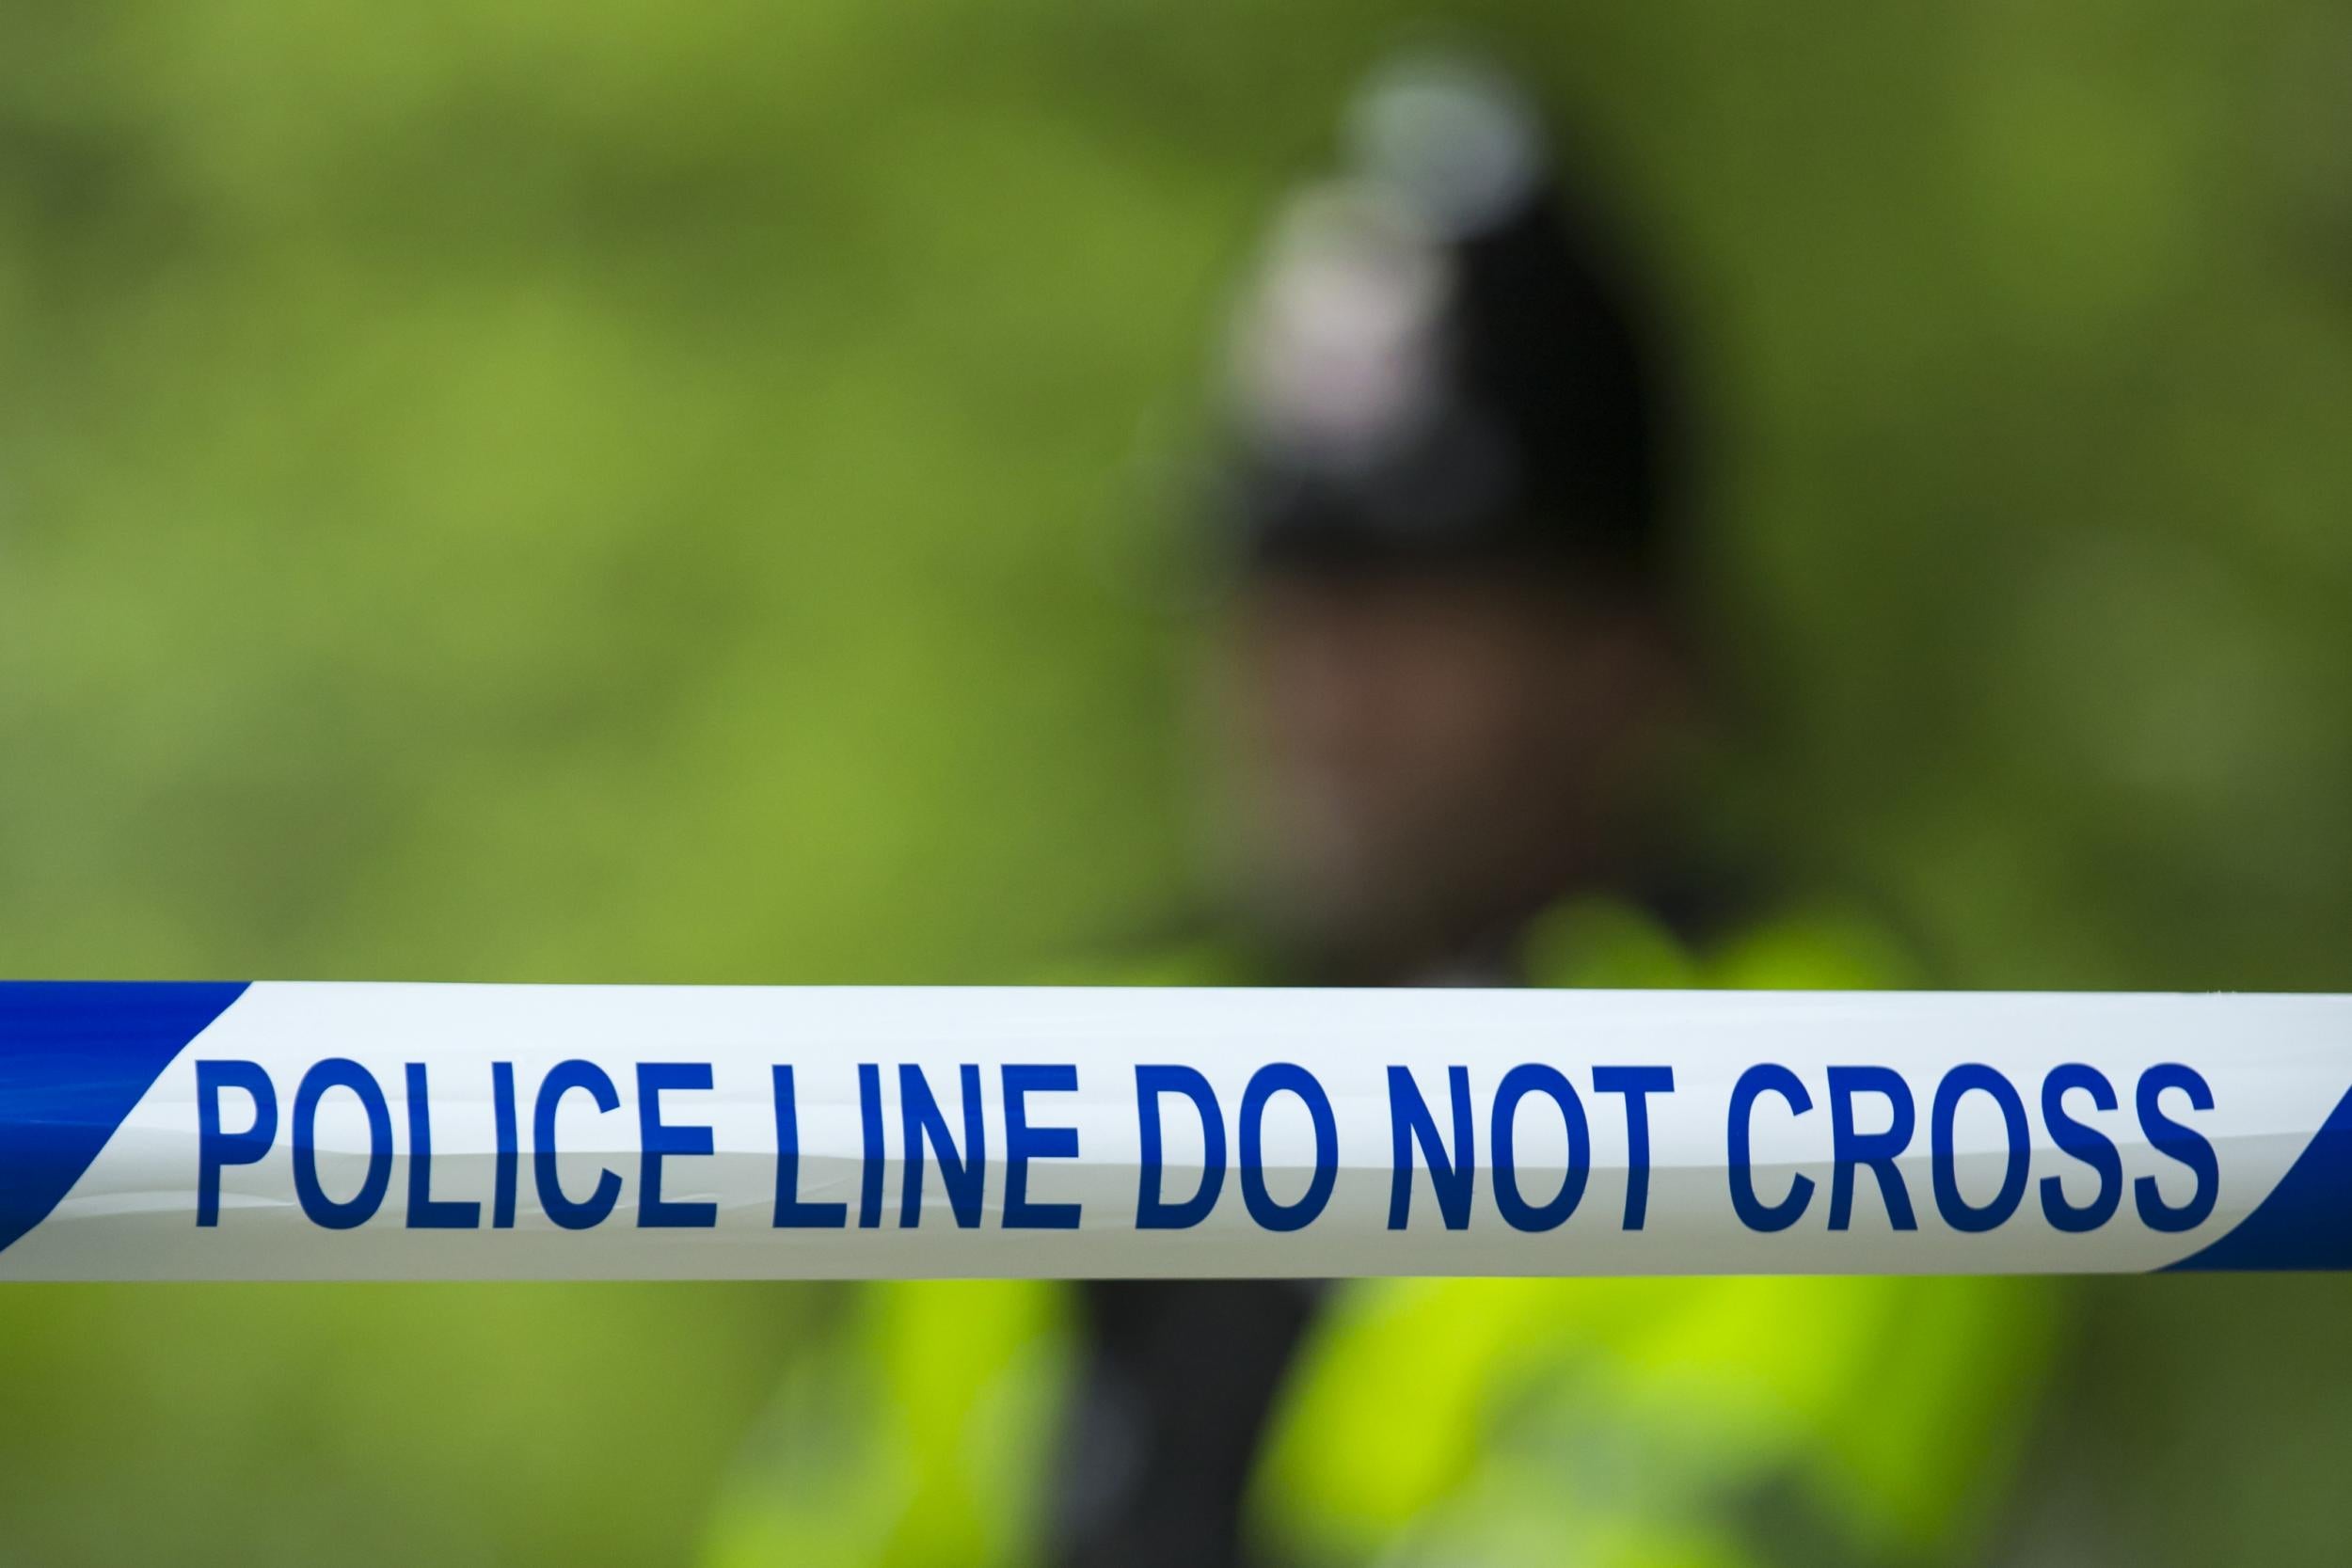 Police were called on Saturday night with reports of a man with serious injuries